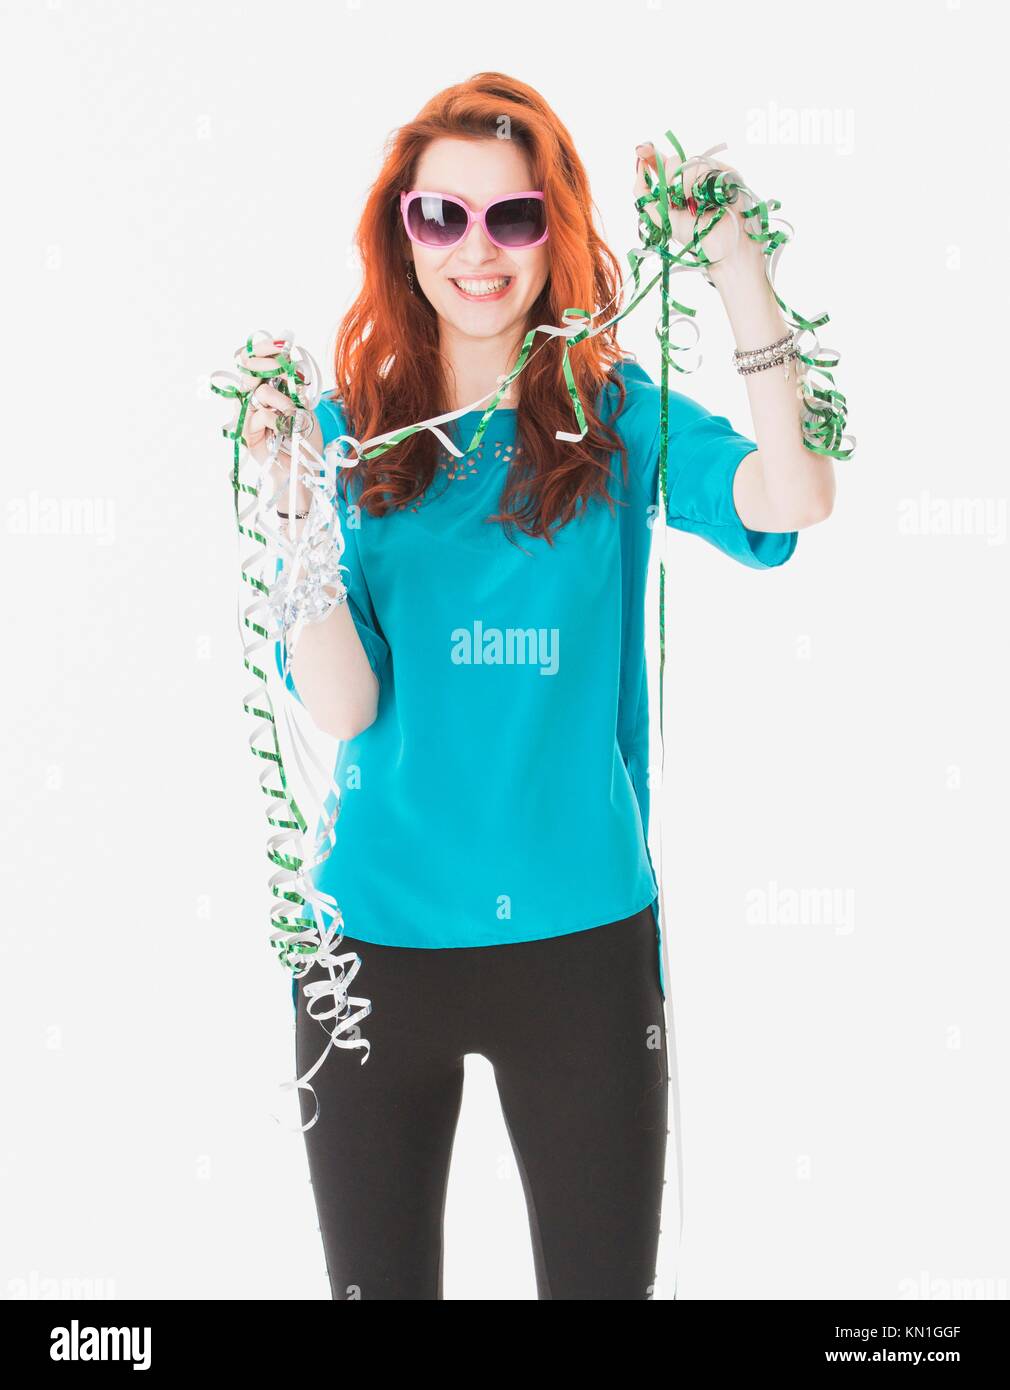 Attractive and happy young woman celebrating with party streamers. Stock Photo